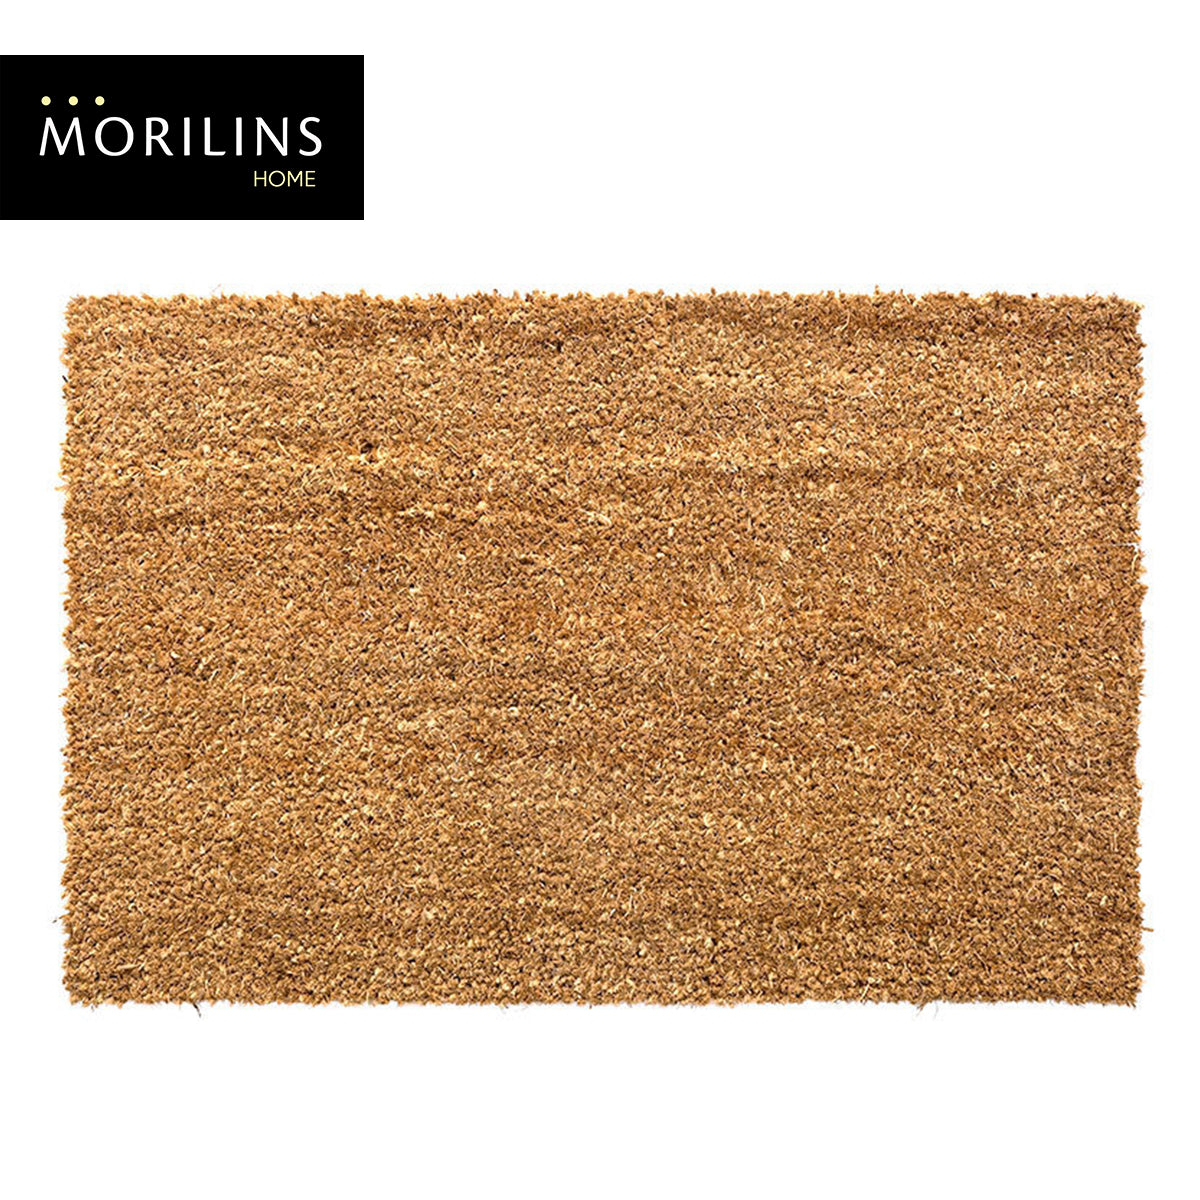 [Morilins Home] Coconut Husk Entrance Floor Mat - Large, Durable, and Eco-Friendly Mat for Your Home or Business - Provides Efficient Scrubbing Action for Clean and Tidy Floors - Bloom Concept